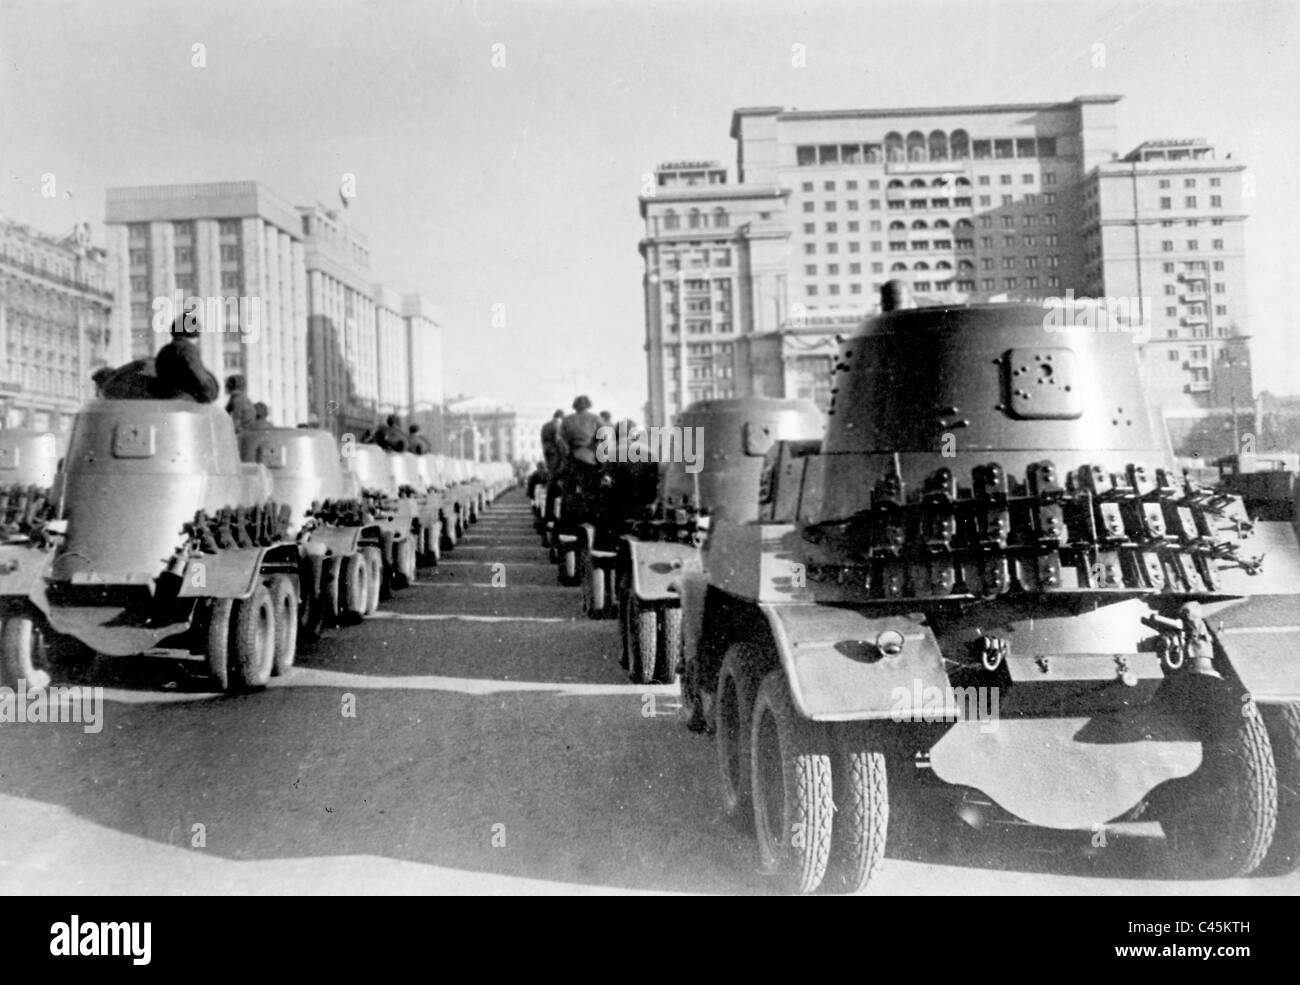 Armored cars of the Soviet army, 1940 Stock Photo